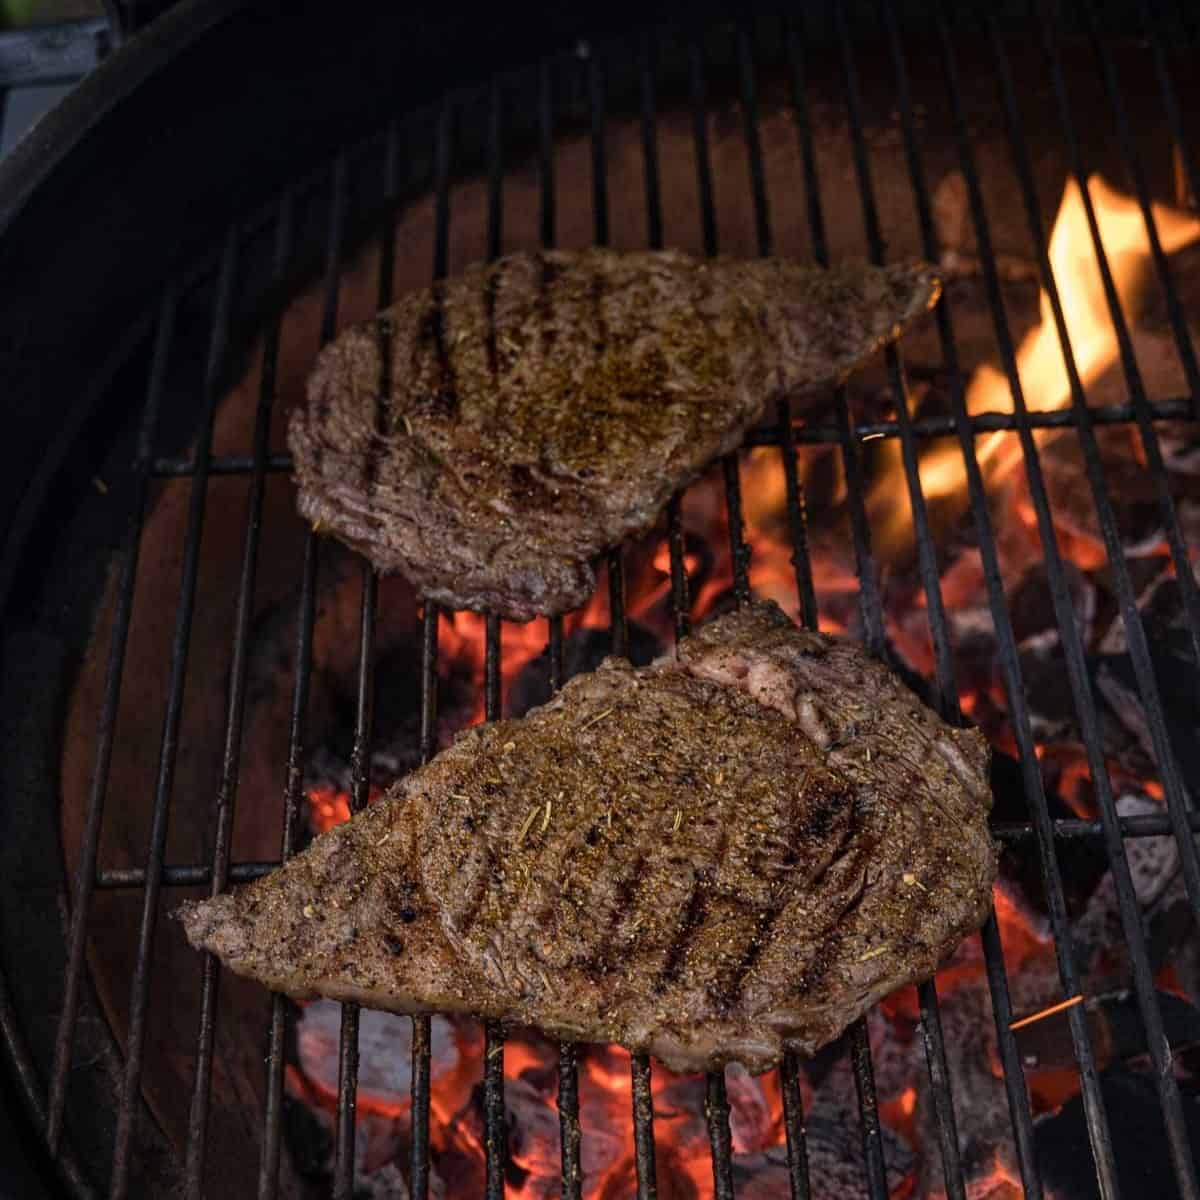 2 Thin steaks on a grill over direct heat.